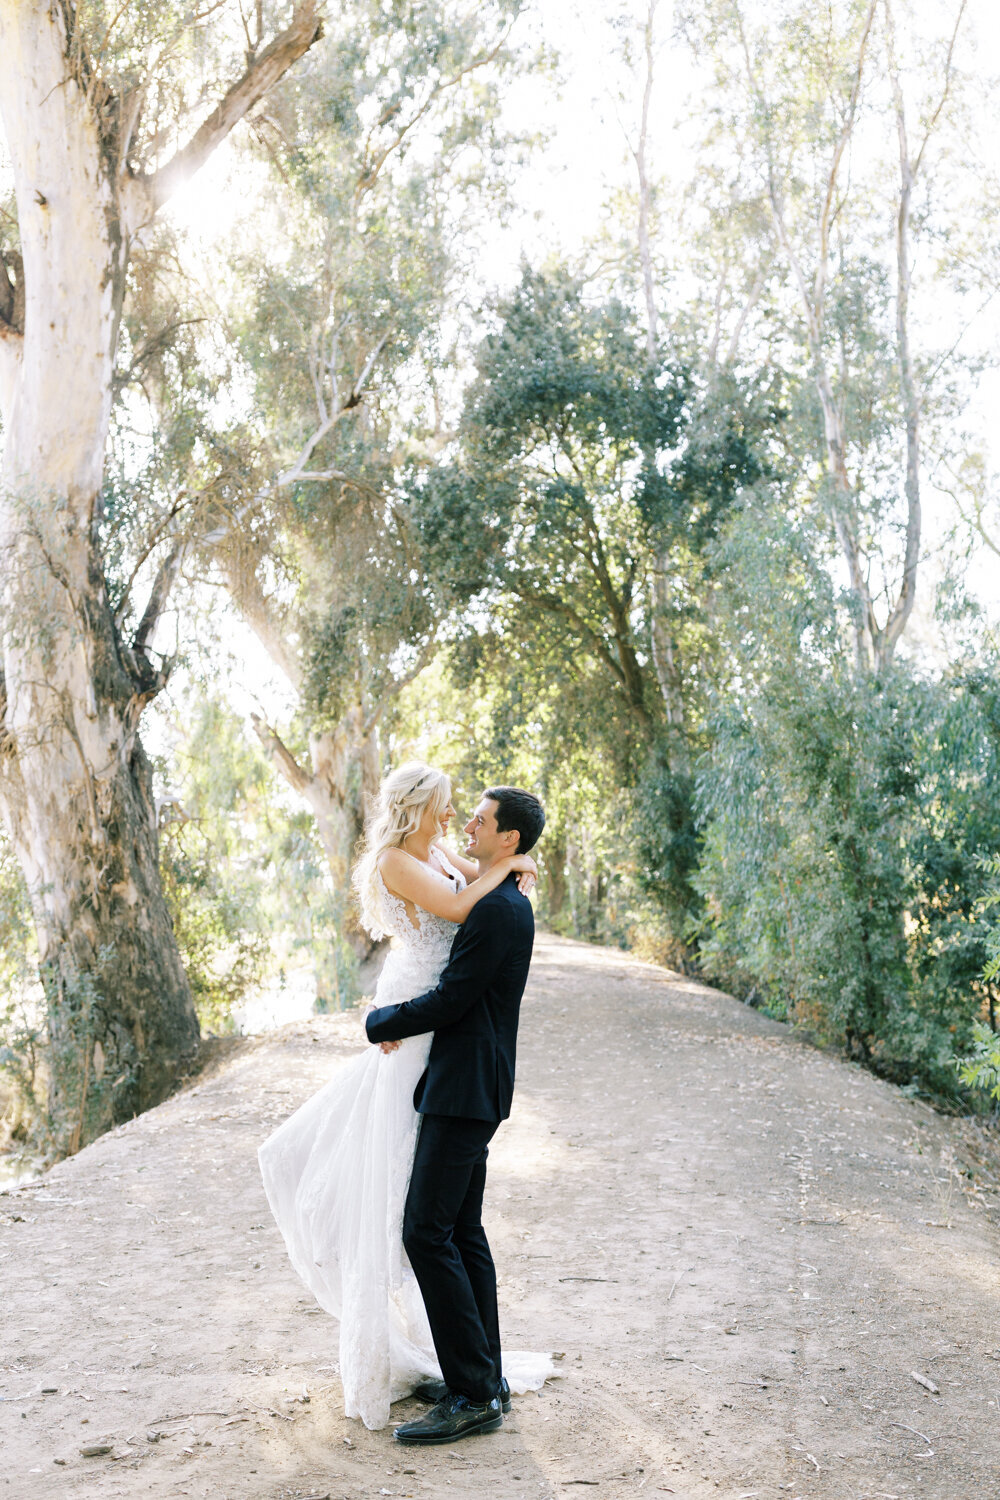 groom picking up his bride on a dirt road under the eucalyptus trees